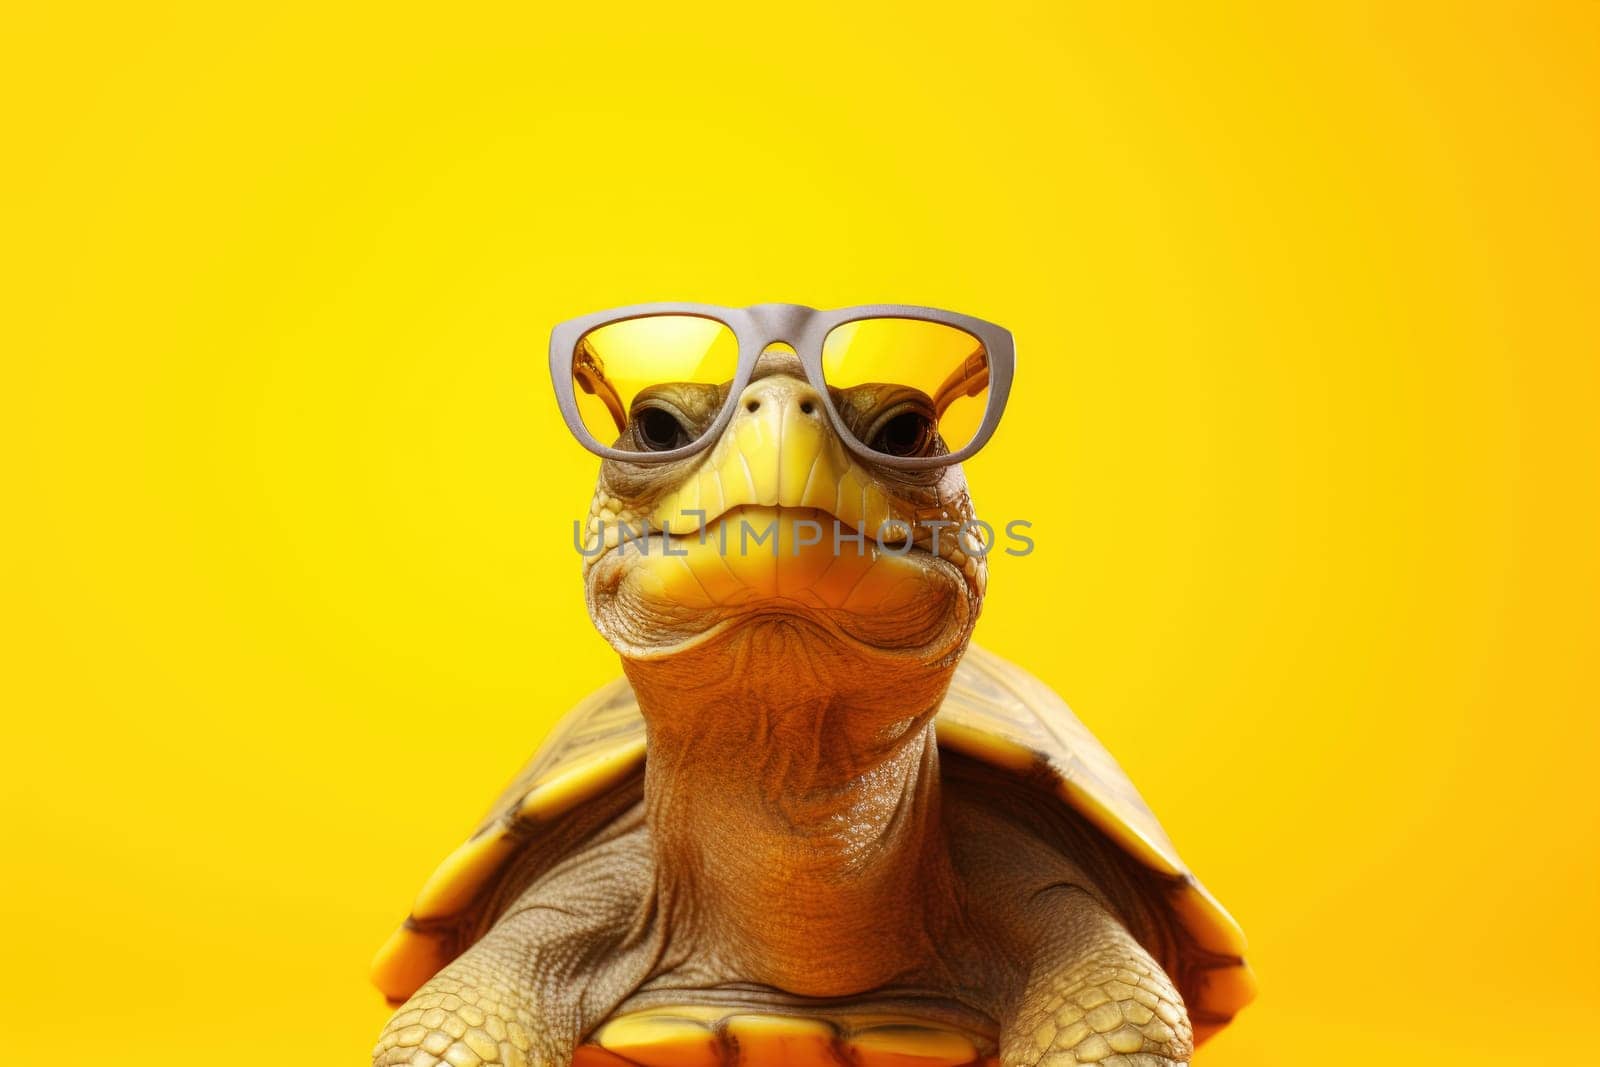 Cute turtle wearing sunglasses on yellow background.